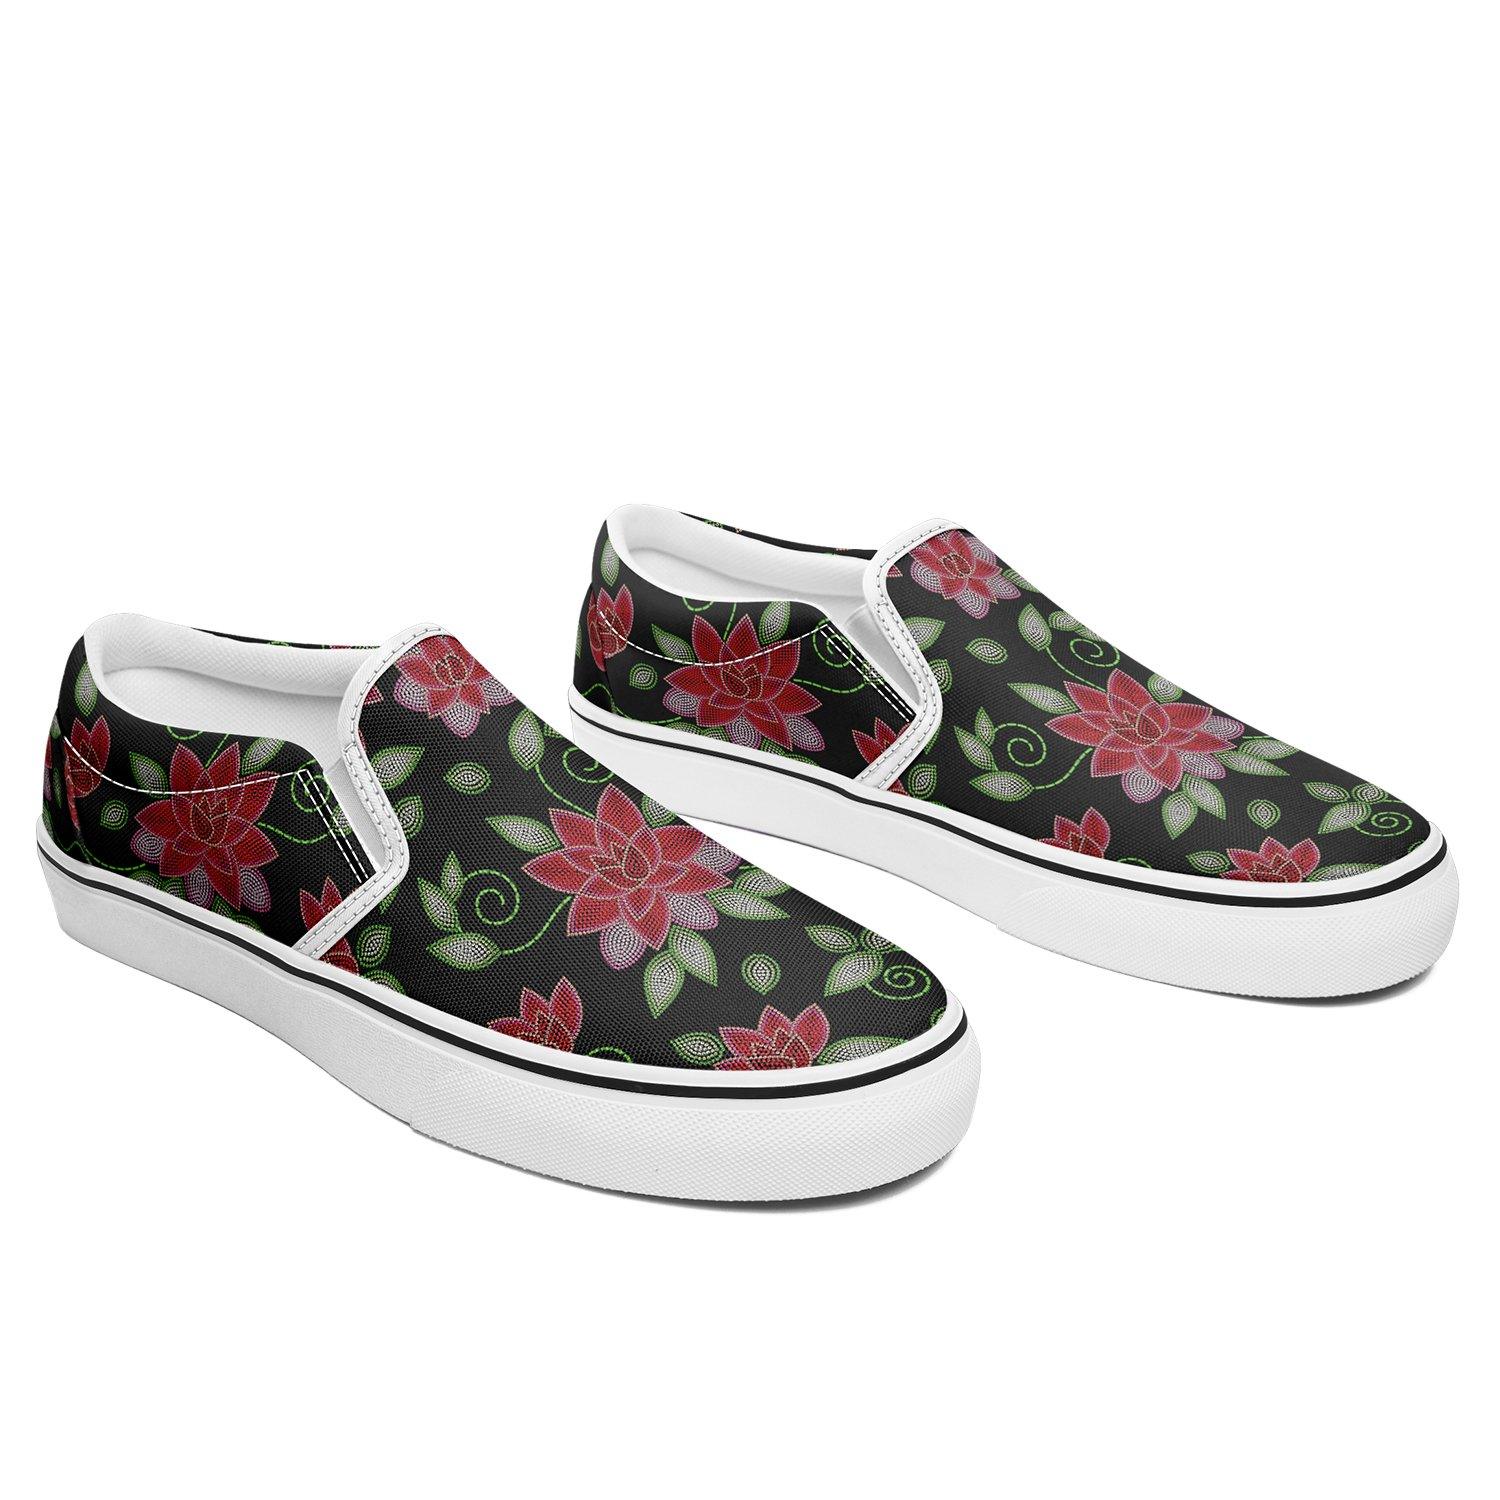 Red Beaded Rose Otoyimm Canvas Slip On Shoes otoyimm Herman 